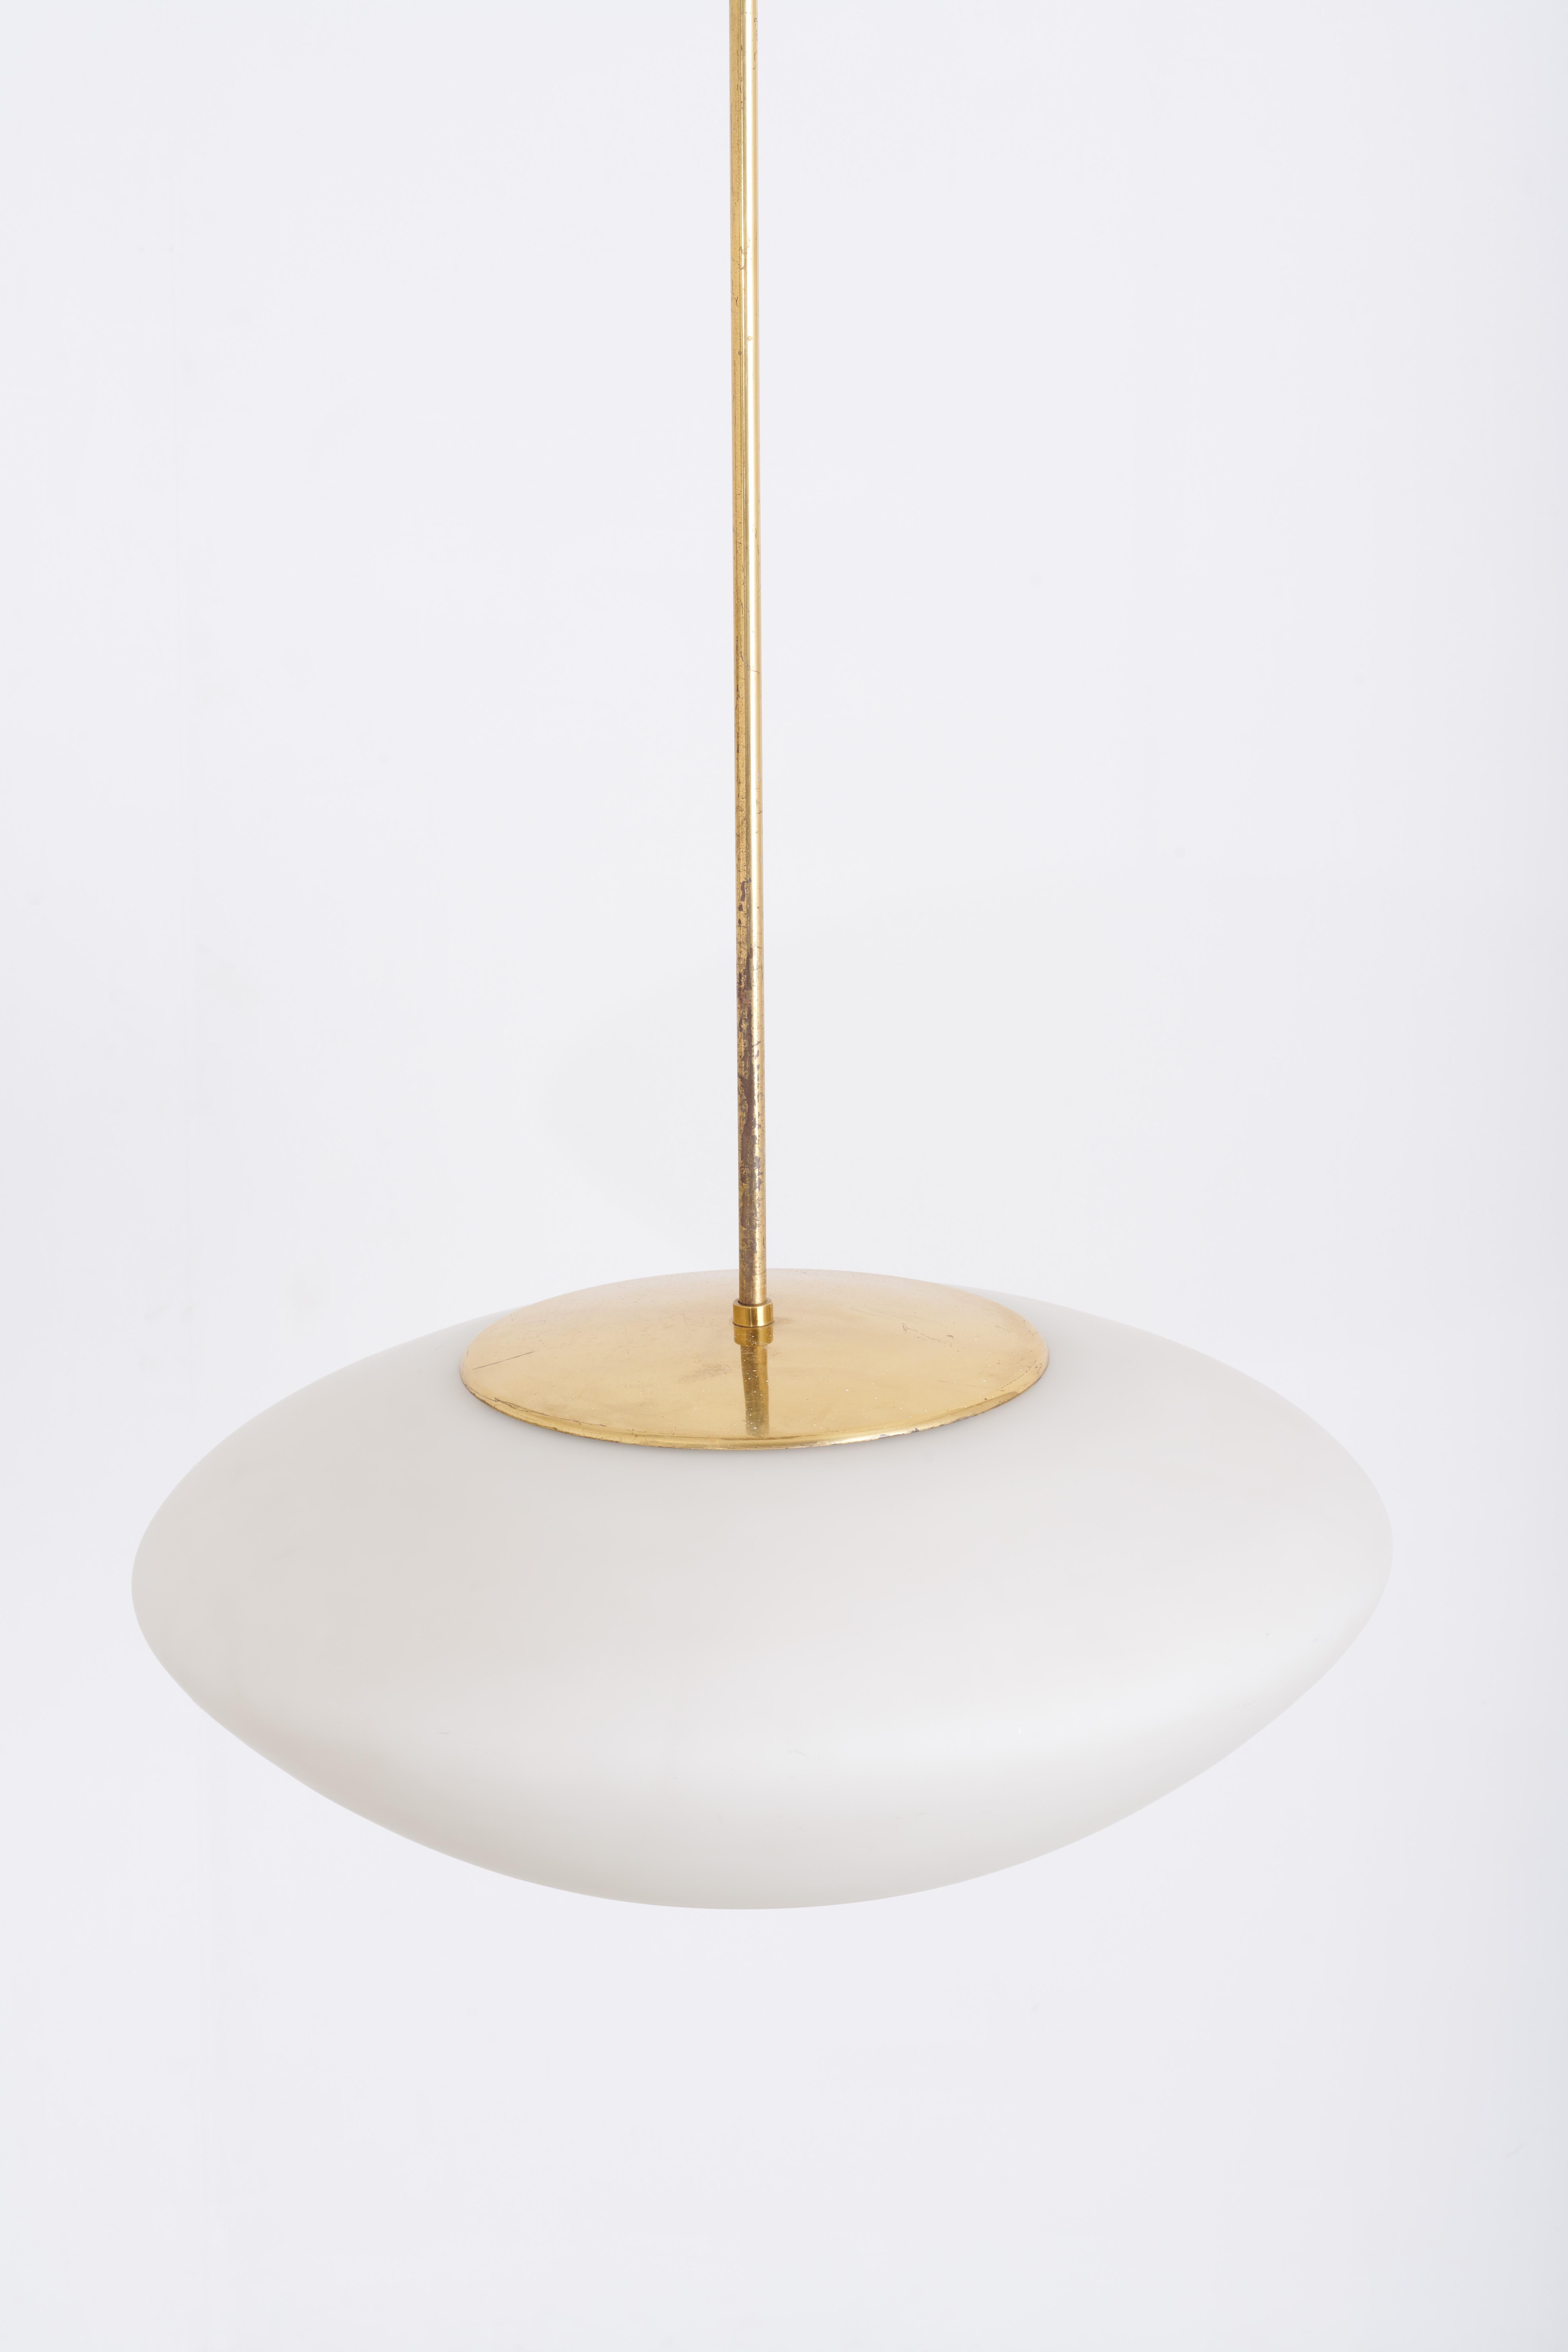 Mid-20th Century 1950 Lisa Johansson Pape - Ceiling lamp brass, opaline glass For Sale